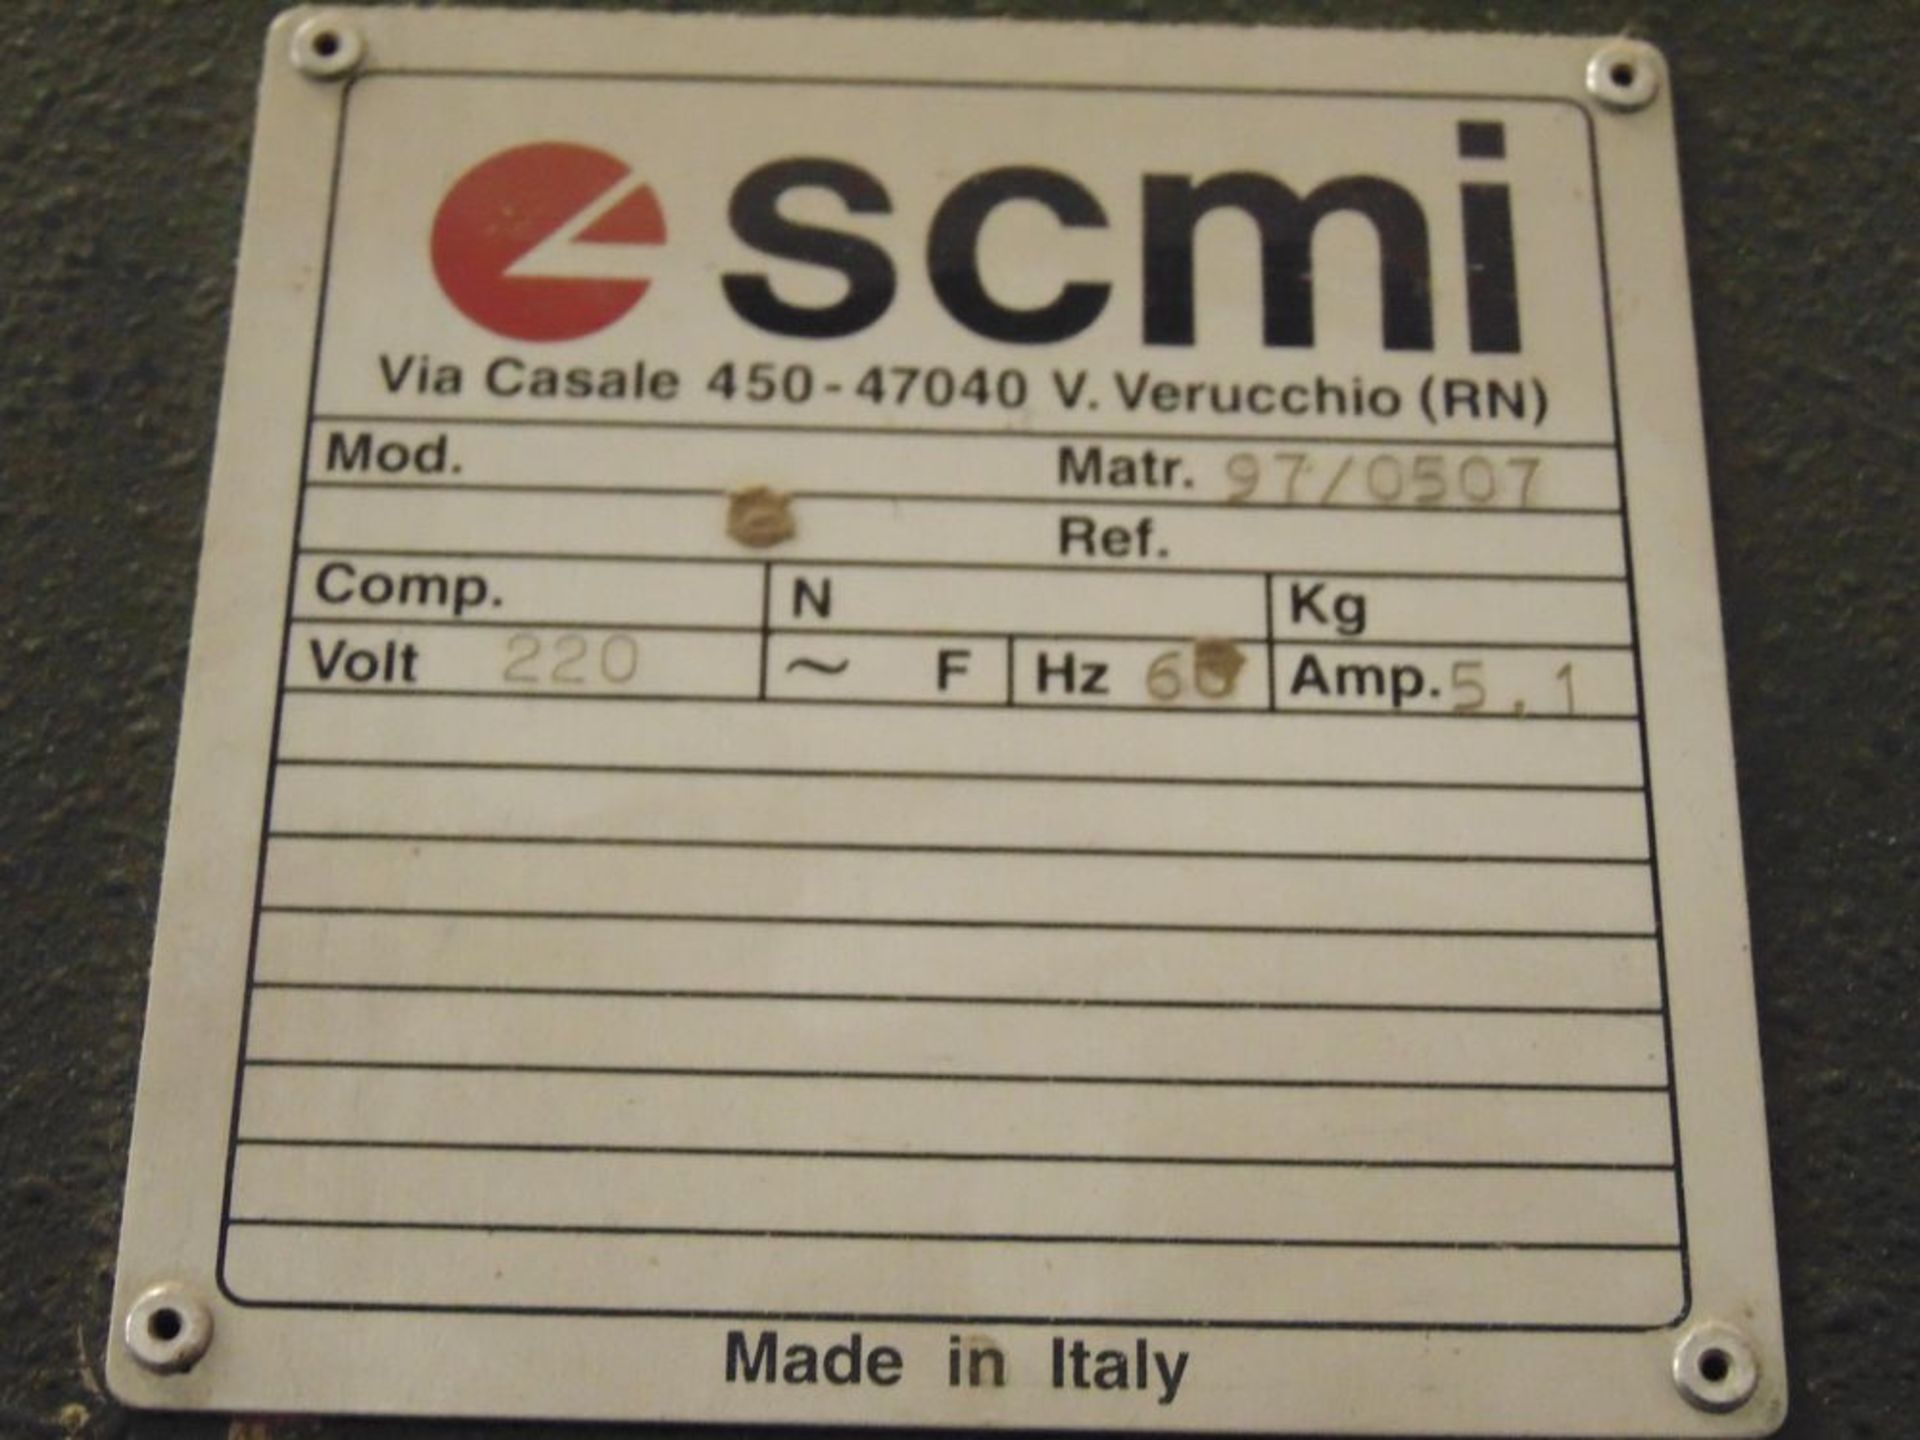 SCMi, 24" Vertical Band Saw, 220 Volts S/N 0507 - Image 3 of 3